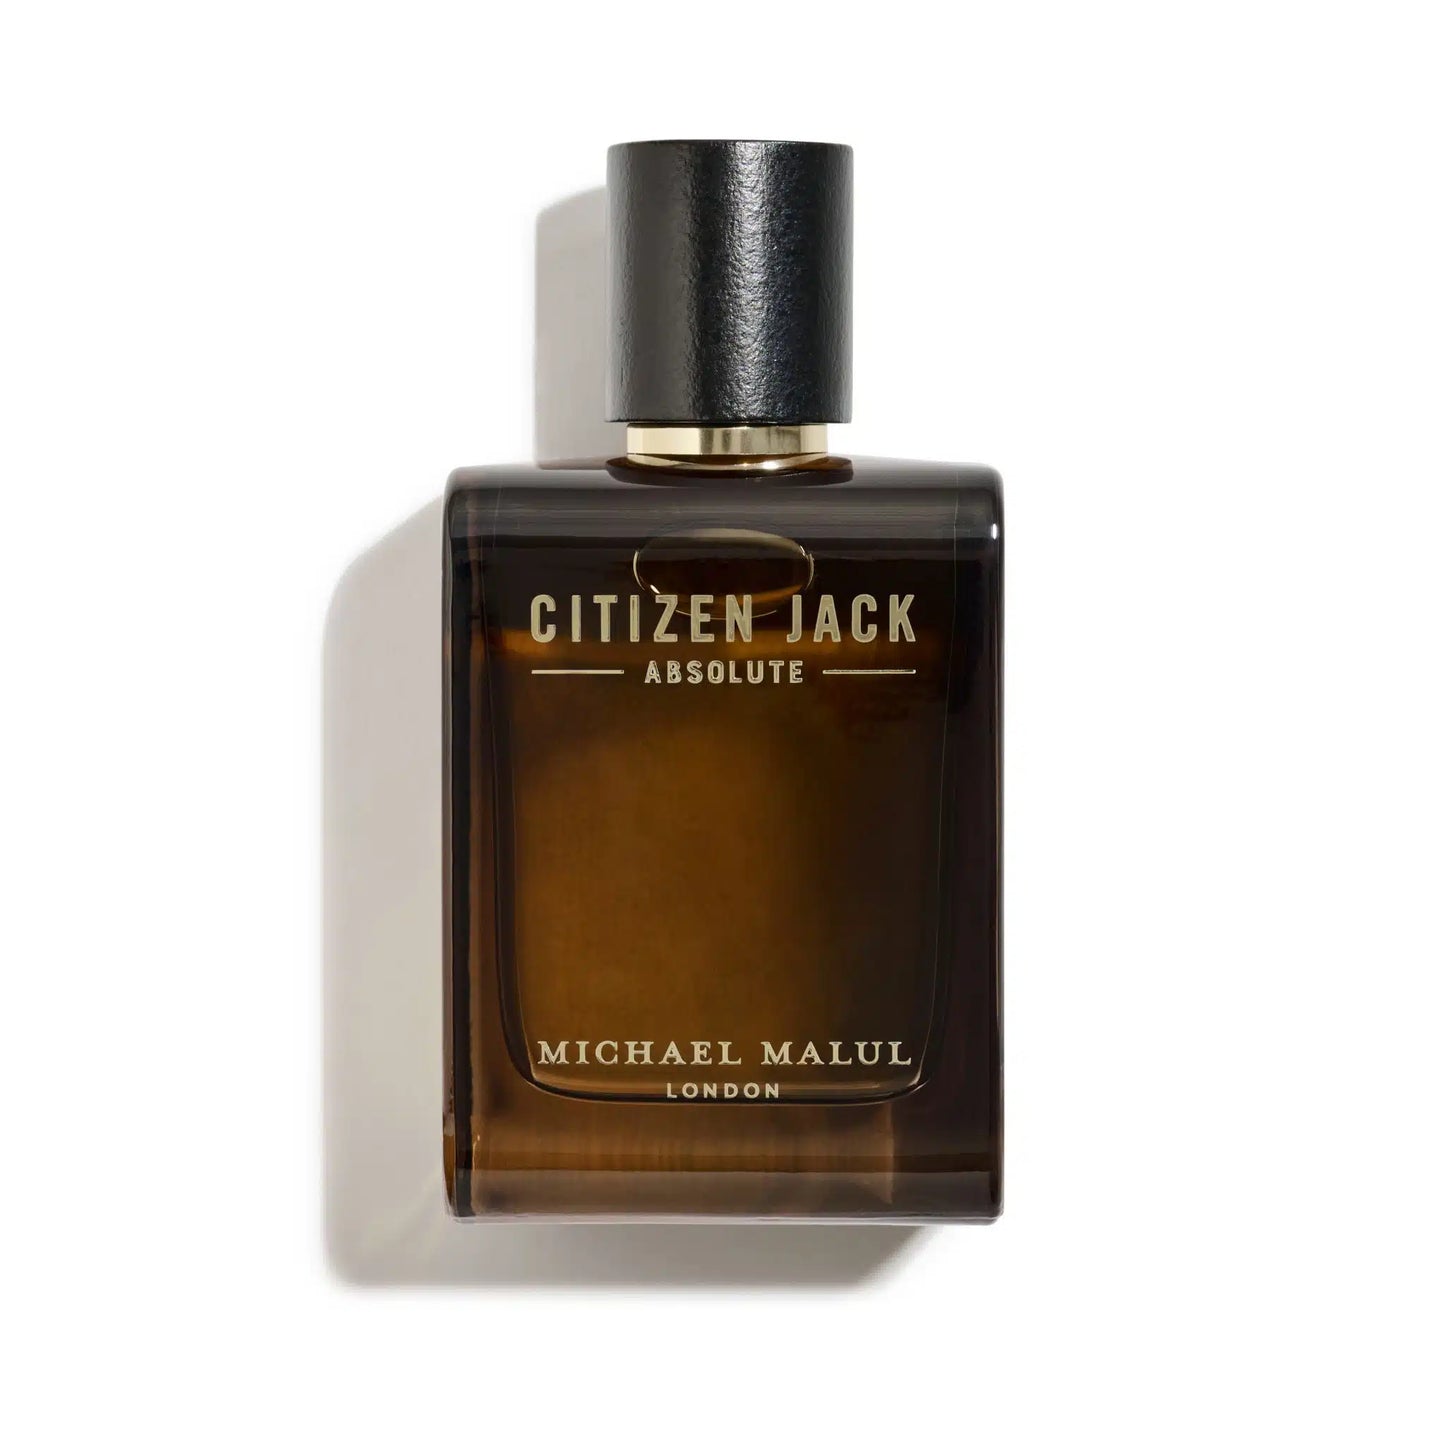 Citizen Jack Absolute by Michael Malul 3.4 oz For Men